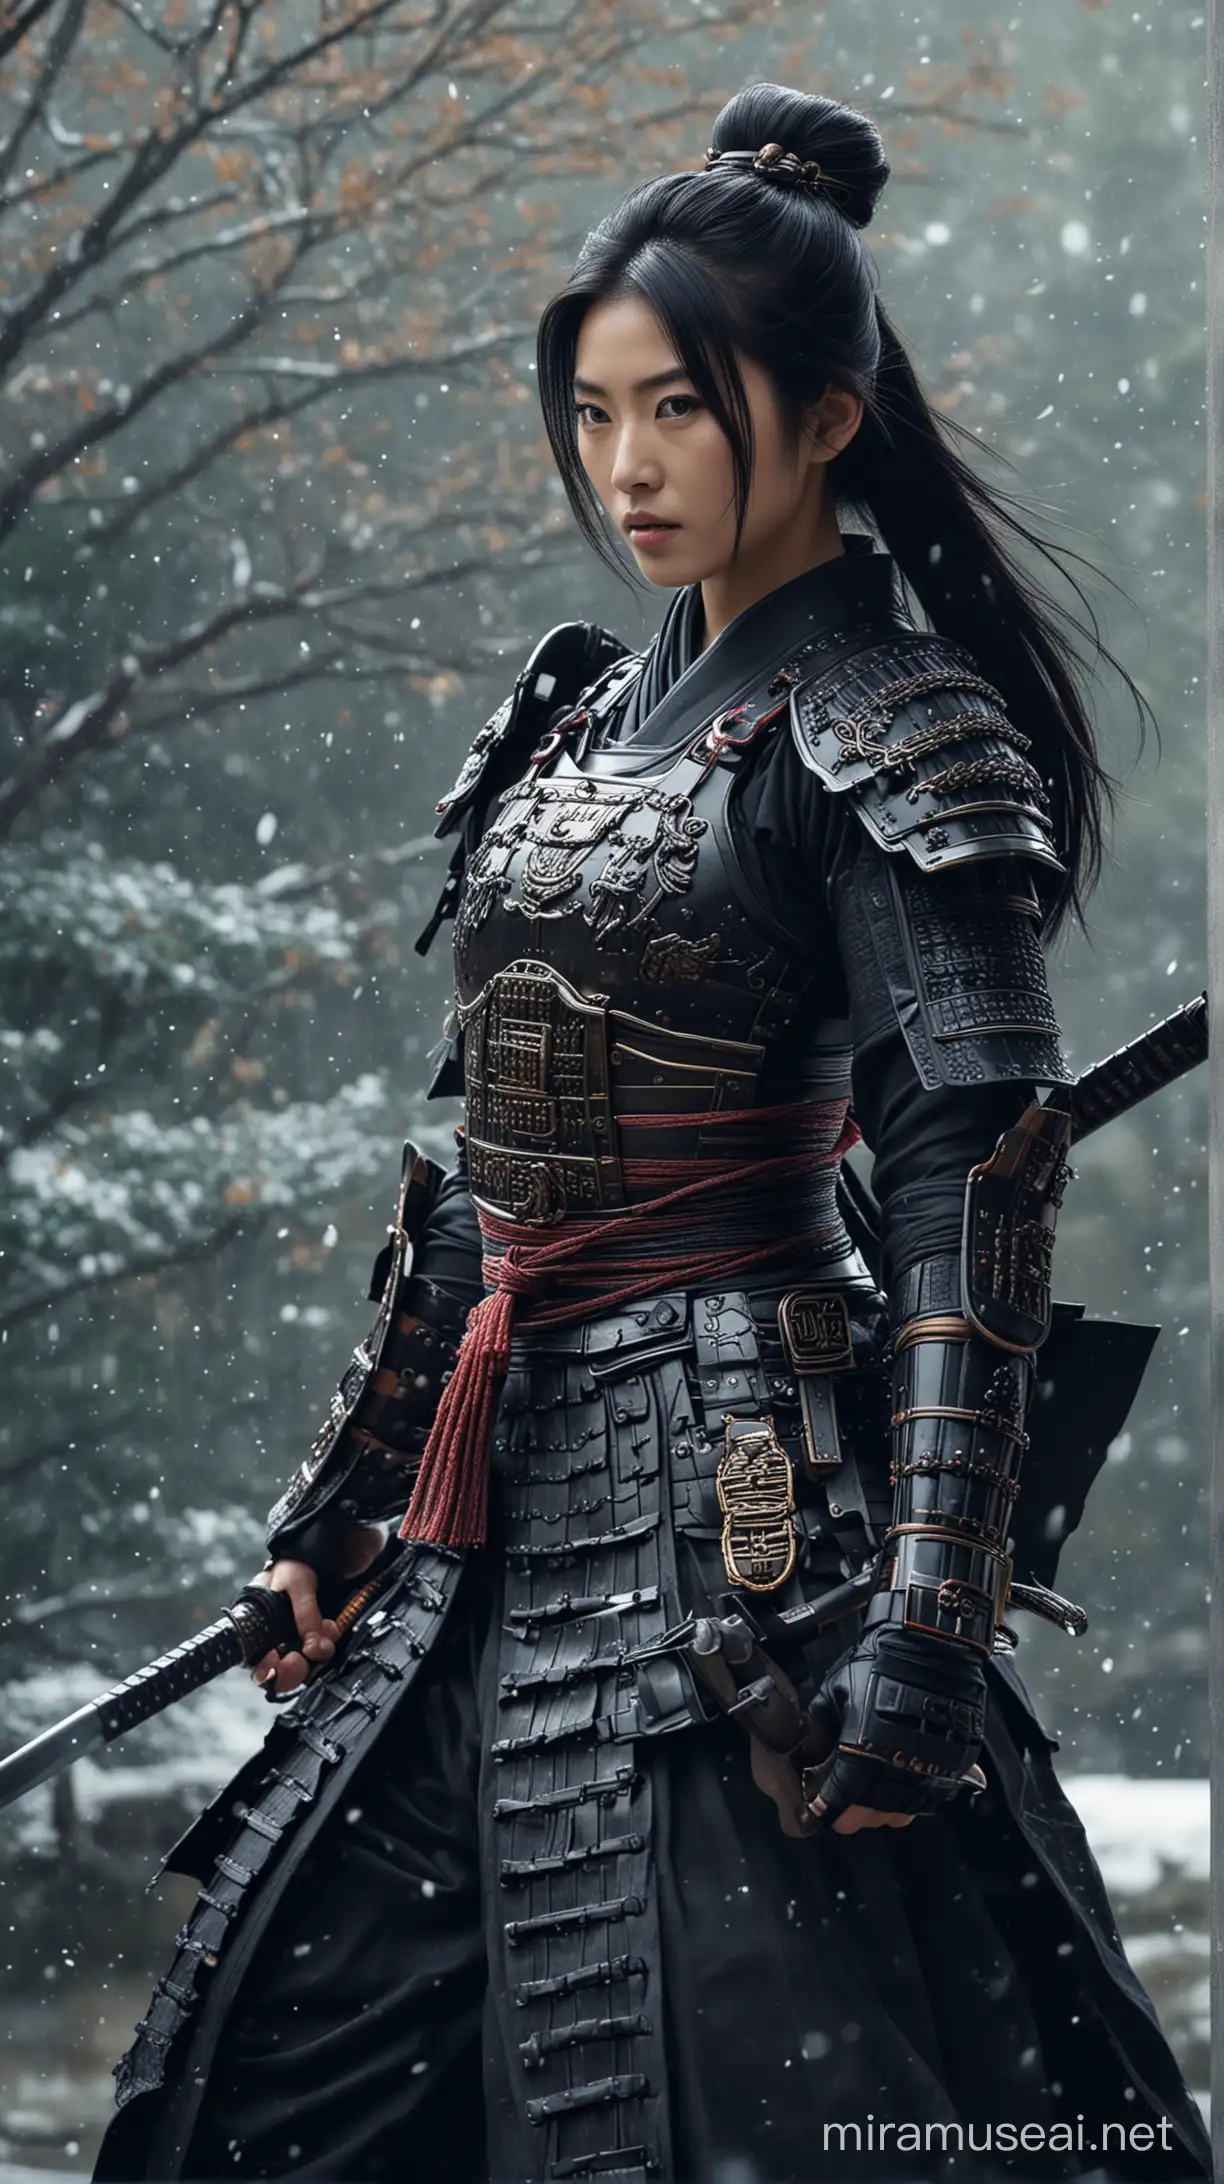 Character: A stunning female samurai warrior in bright Black armor that shows elegance and strength.
Environment: A peaceful Japanese temple.
Background: A Side view of a simple but beautiful Japanese temple.
Style: A rich fashion shoot blending the classic samurai look with a modern twist.
Photography Type: A cinematic  shoot that brings out the character of the black-armored samurai.
Theme: A shoot that combines old and new, centered on the black-armored samurai.
Visual Filters: Enhanced with a Fashion Film Look-Up Table (LUT) for a richer look.
Camera Effects: Soft blur, haze, and natural light to bring out the blue of the armor.
Time: Set in a quiet Morning with light snowfall for a peaceful atmosphere.
Resolution: High resolution to capture every detail.
Key Element: The main focus is the bright light black armor, detailed to catch the light and stand out against the temple.
Details: The armor is detailed with traditional Japanese designs and scenes from samurai stories. It shines in the Sun light, showing off the skill of the people who made it. The shape of the armor is highlighted, creating a beautiful image that brings out the spirit of the samurai.